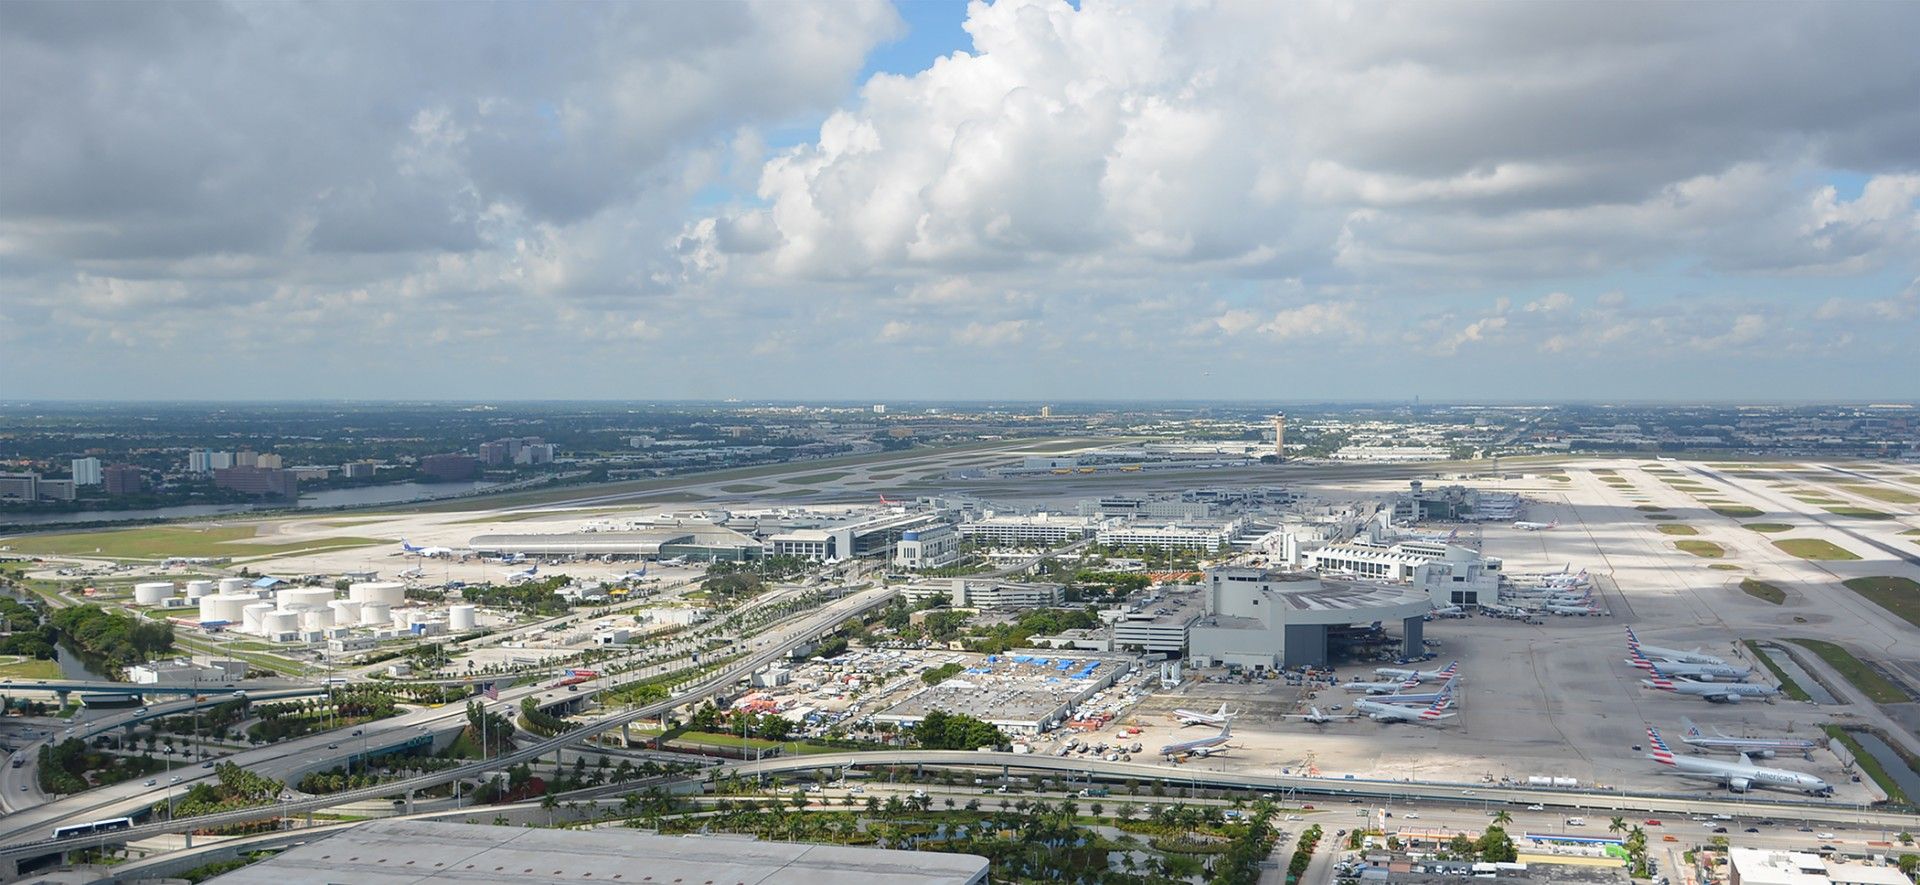 An aerial view of Miami International Airport